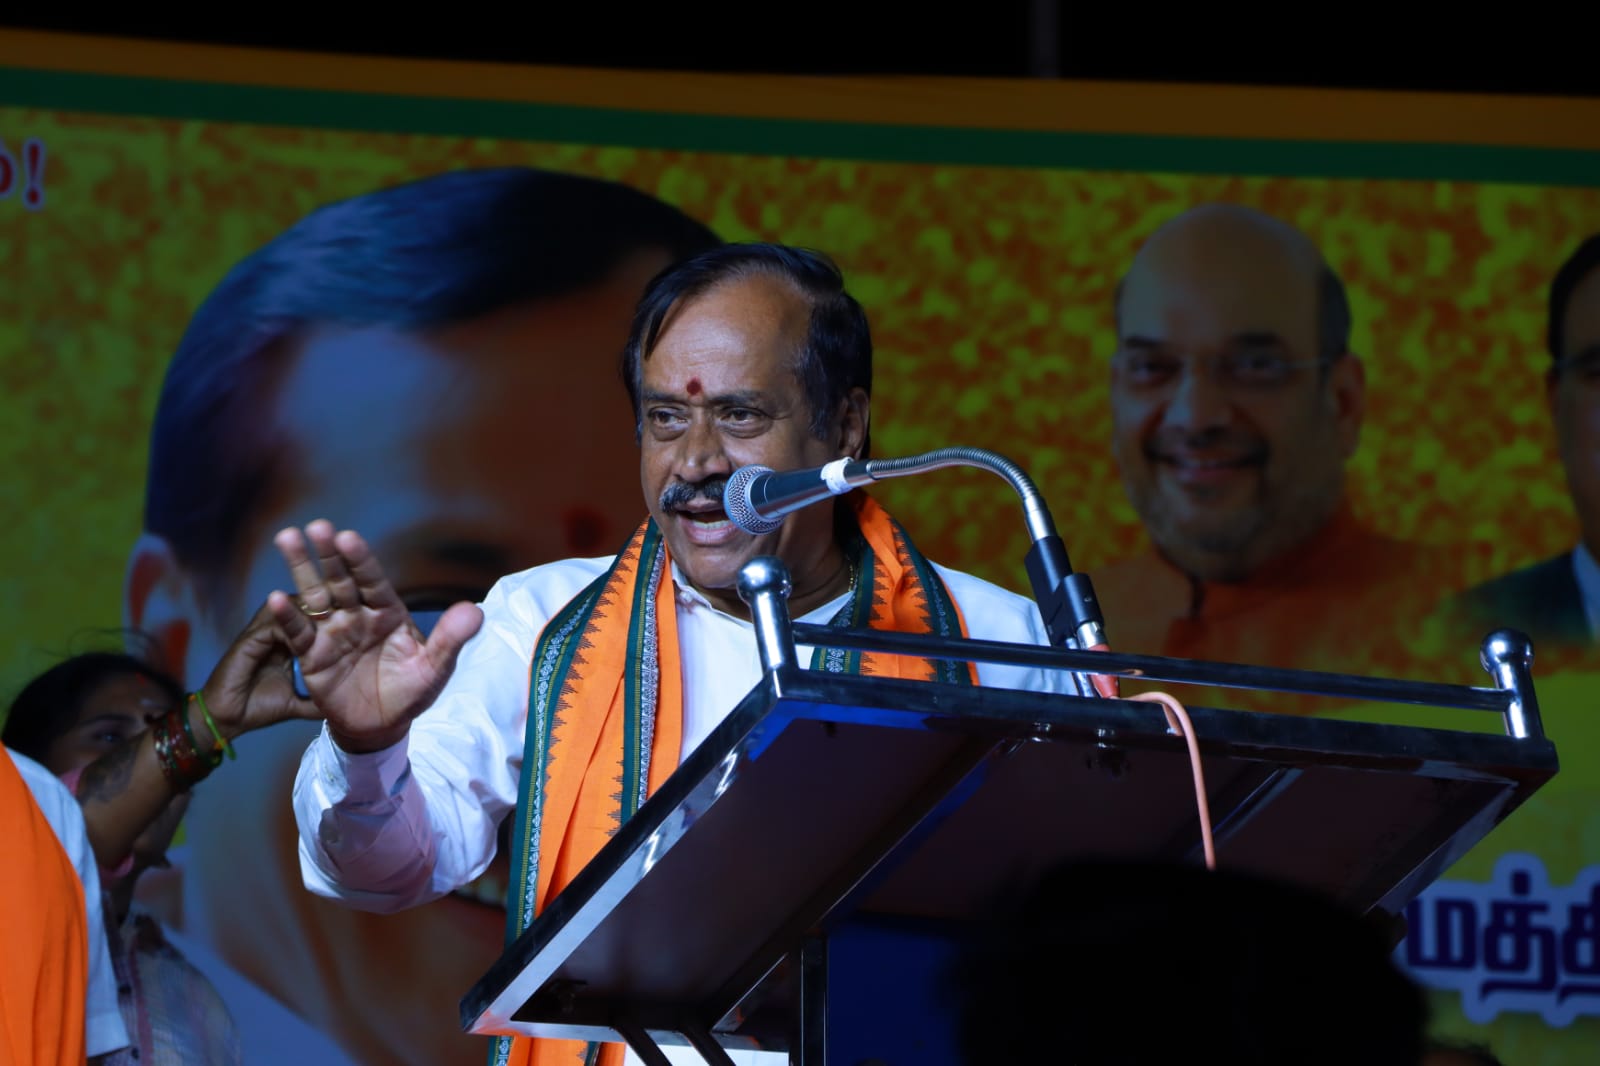 Central vs Union government: Why is Tamil Nadu BJP leader H Raja getting agitated?